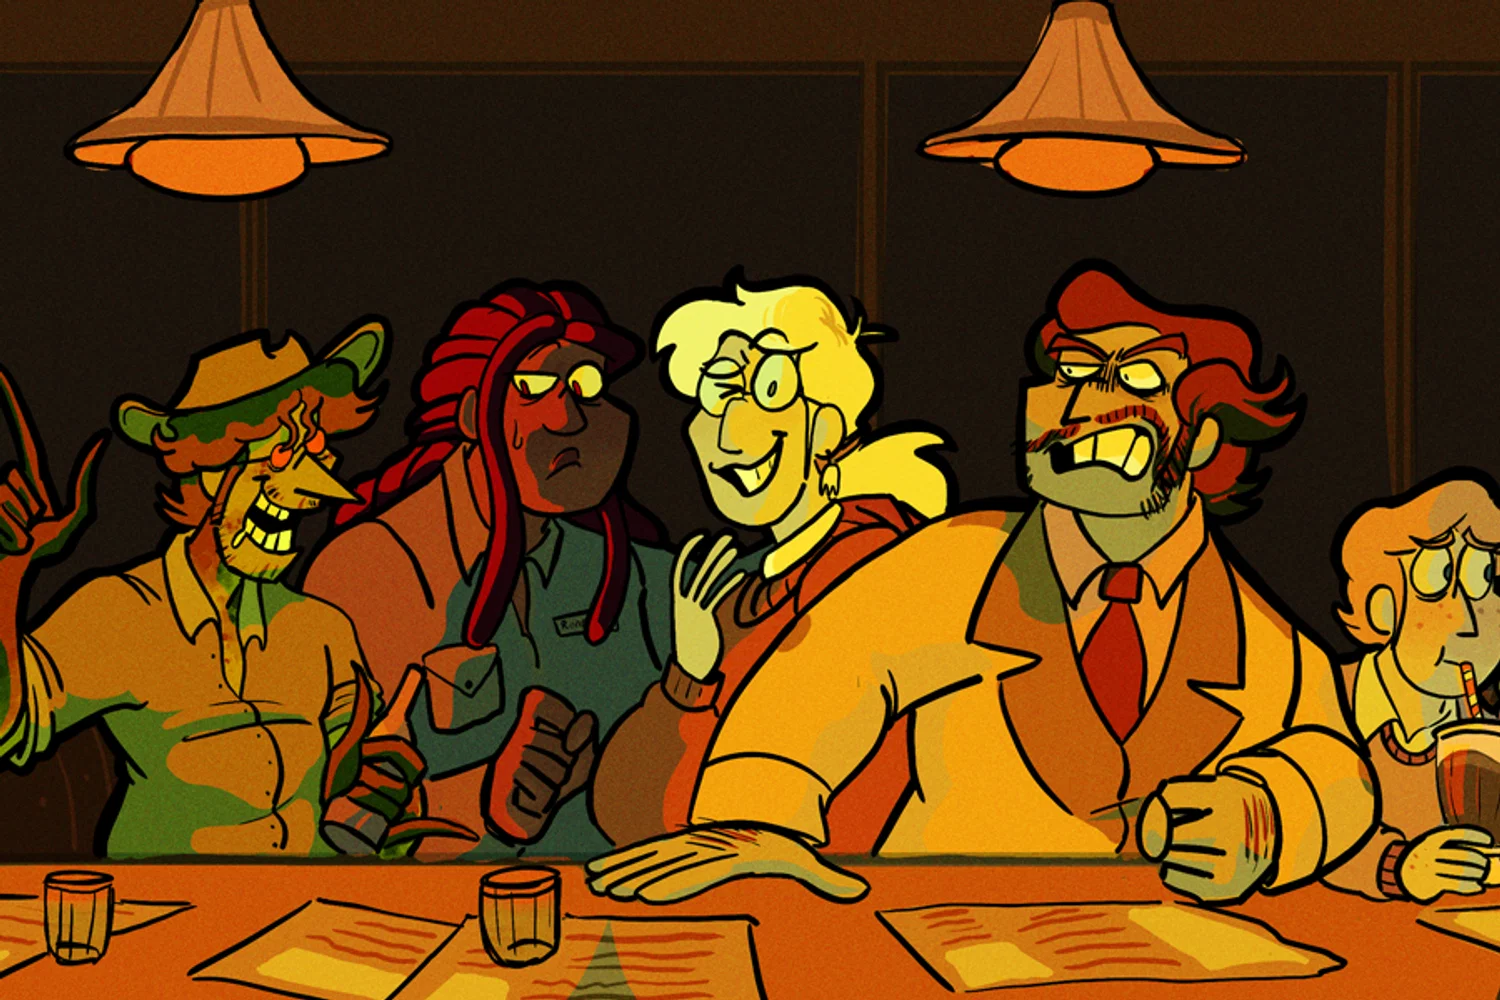 Digital illustration of assorted characters interacting in a diner setting